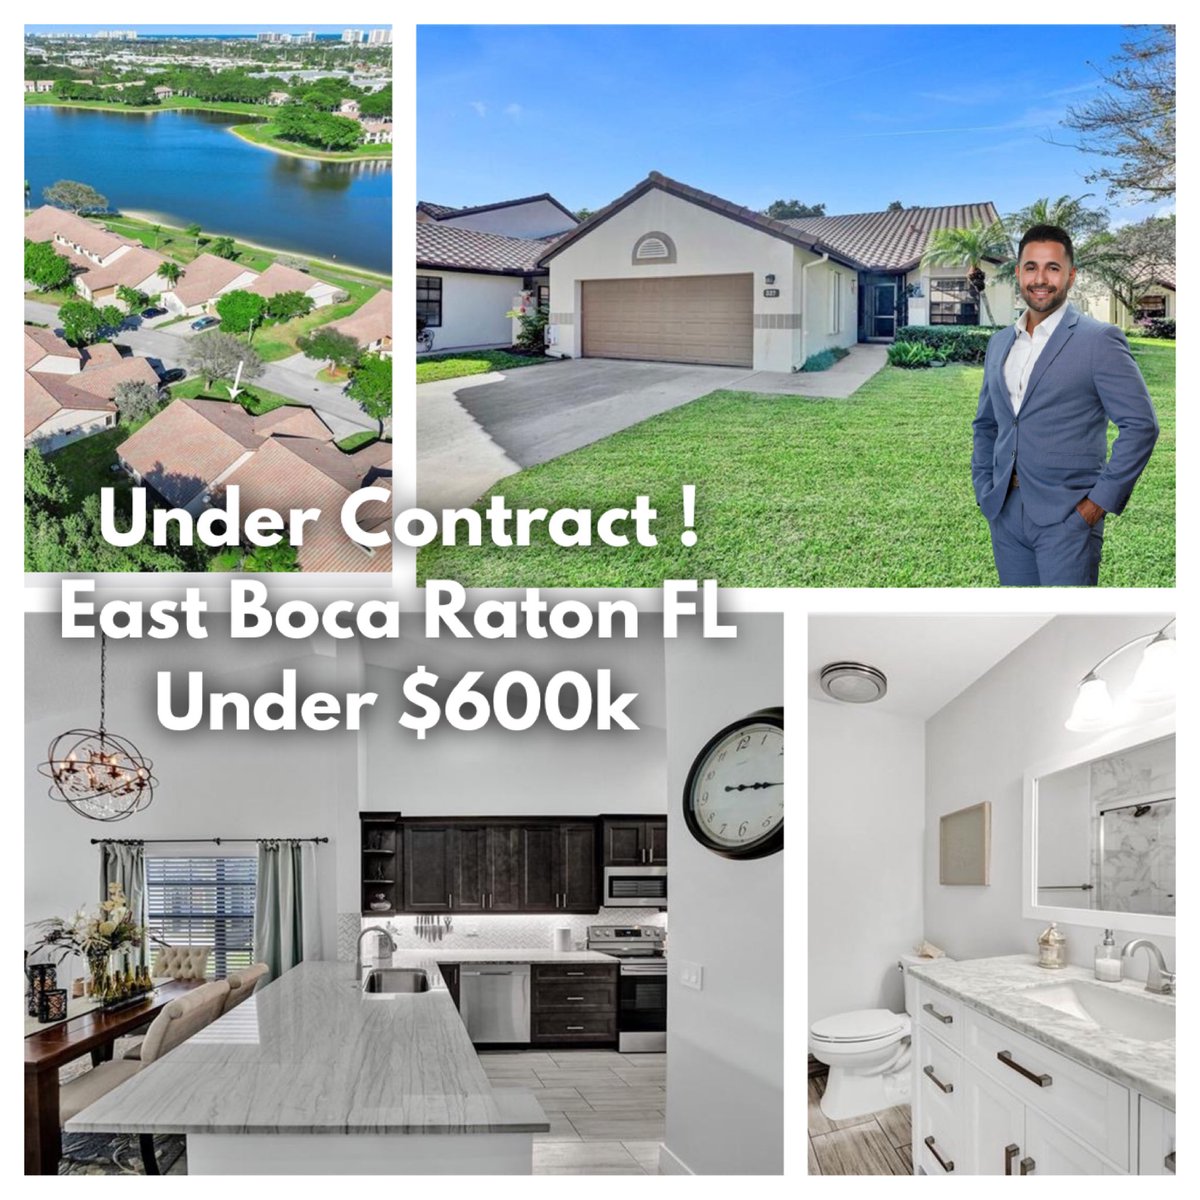 Under contract! 
East Boca Raton in Gate community 
under $600k fully remodeled 
Minutes to Beach and entertainment. 

#bocaraton 
#bocaratonrealestate 
#remax